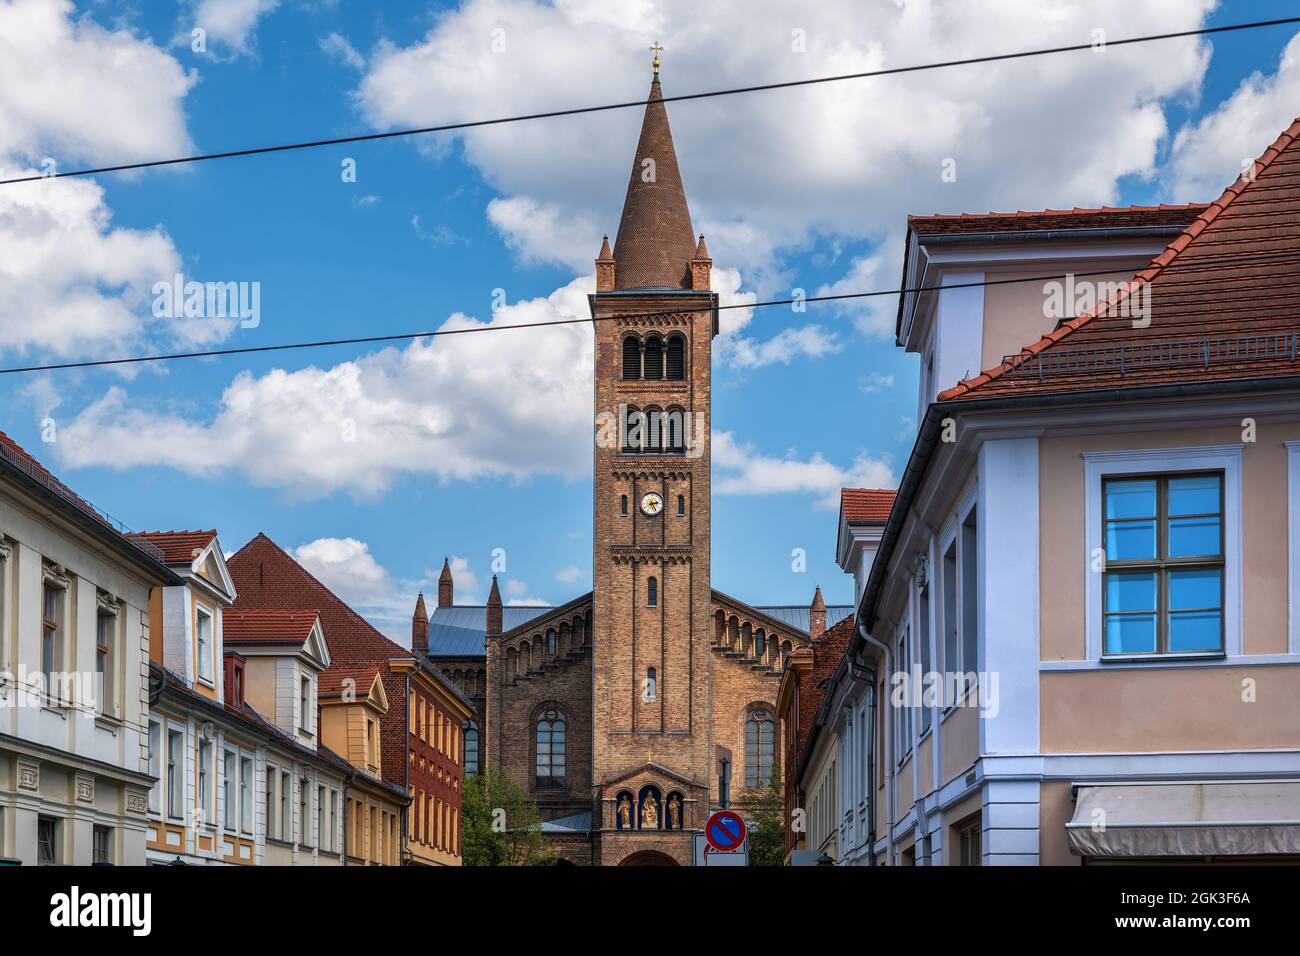 City of Potsdam in Germany, skyline with houses and St. Peter and Paul Church in the middle. Stock Photo